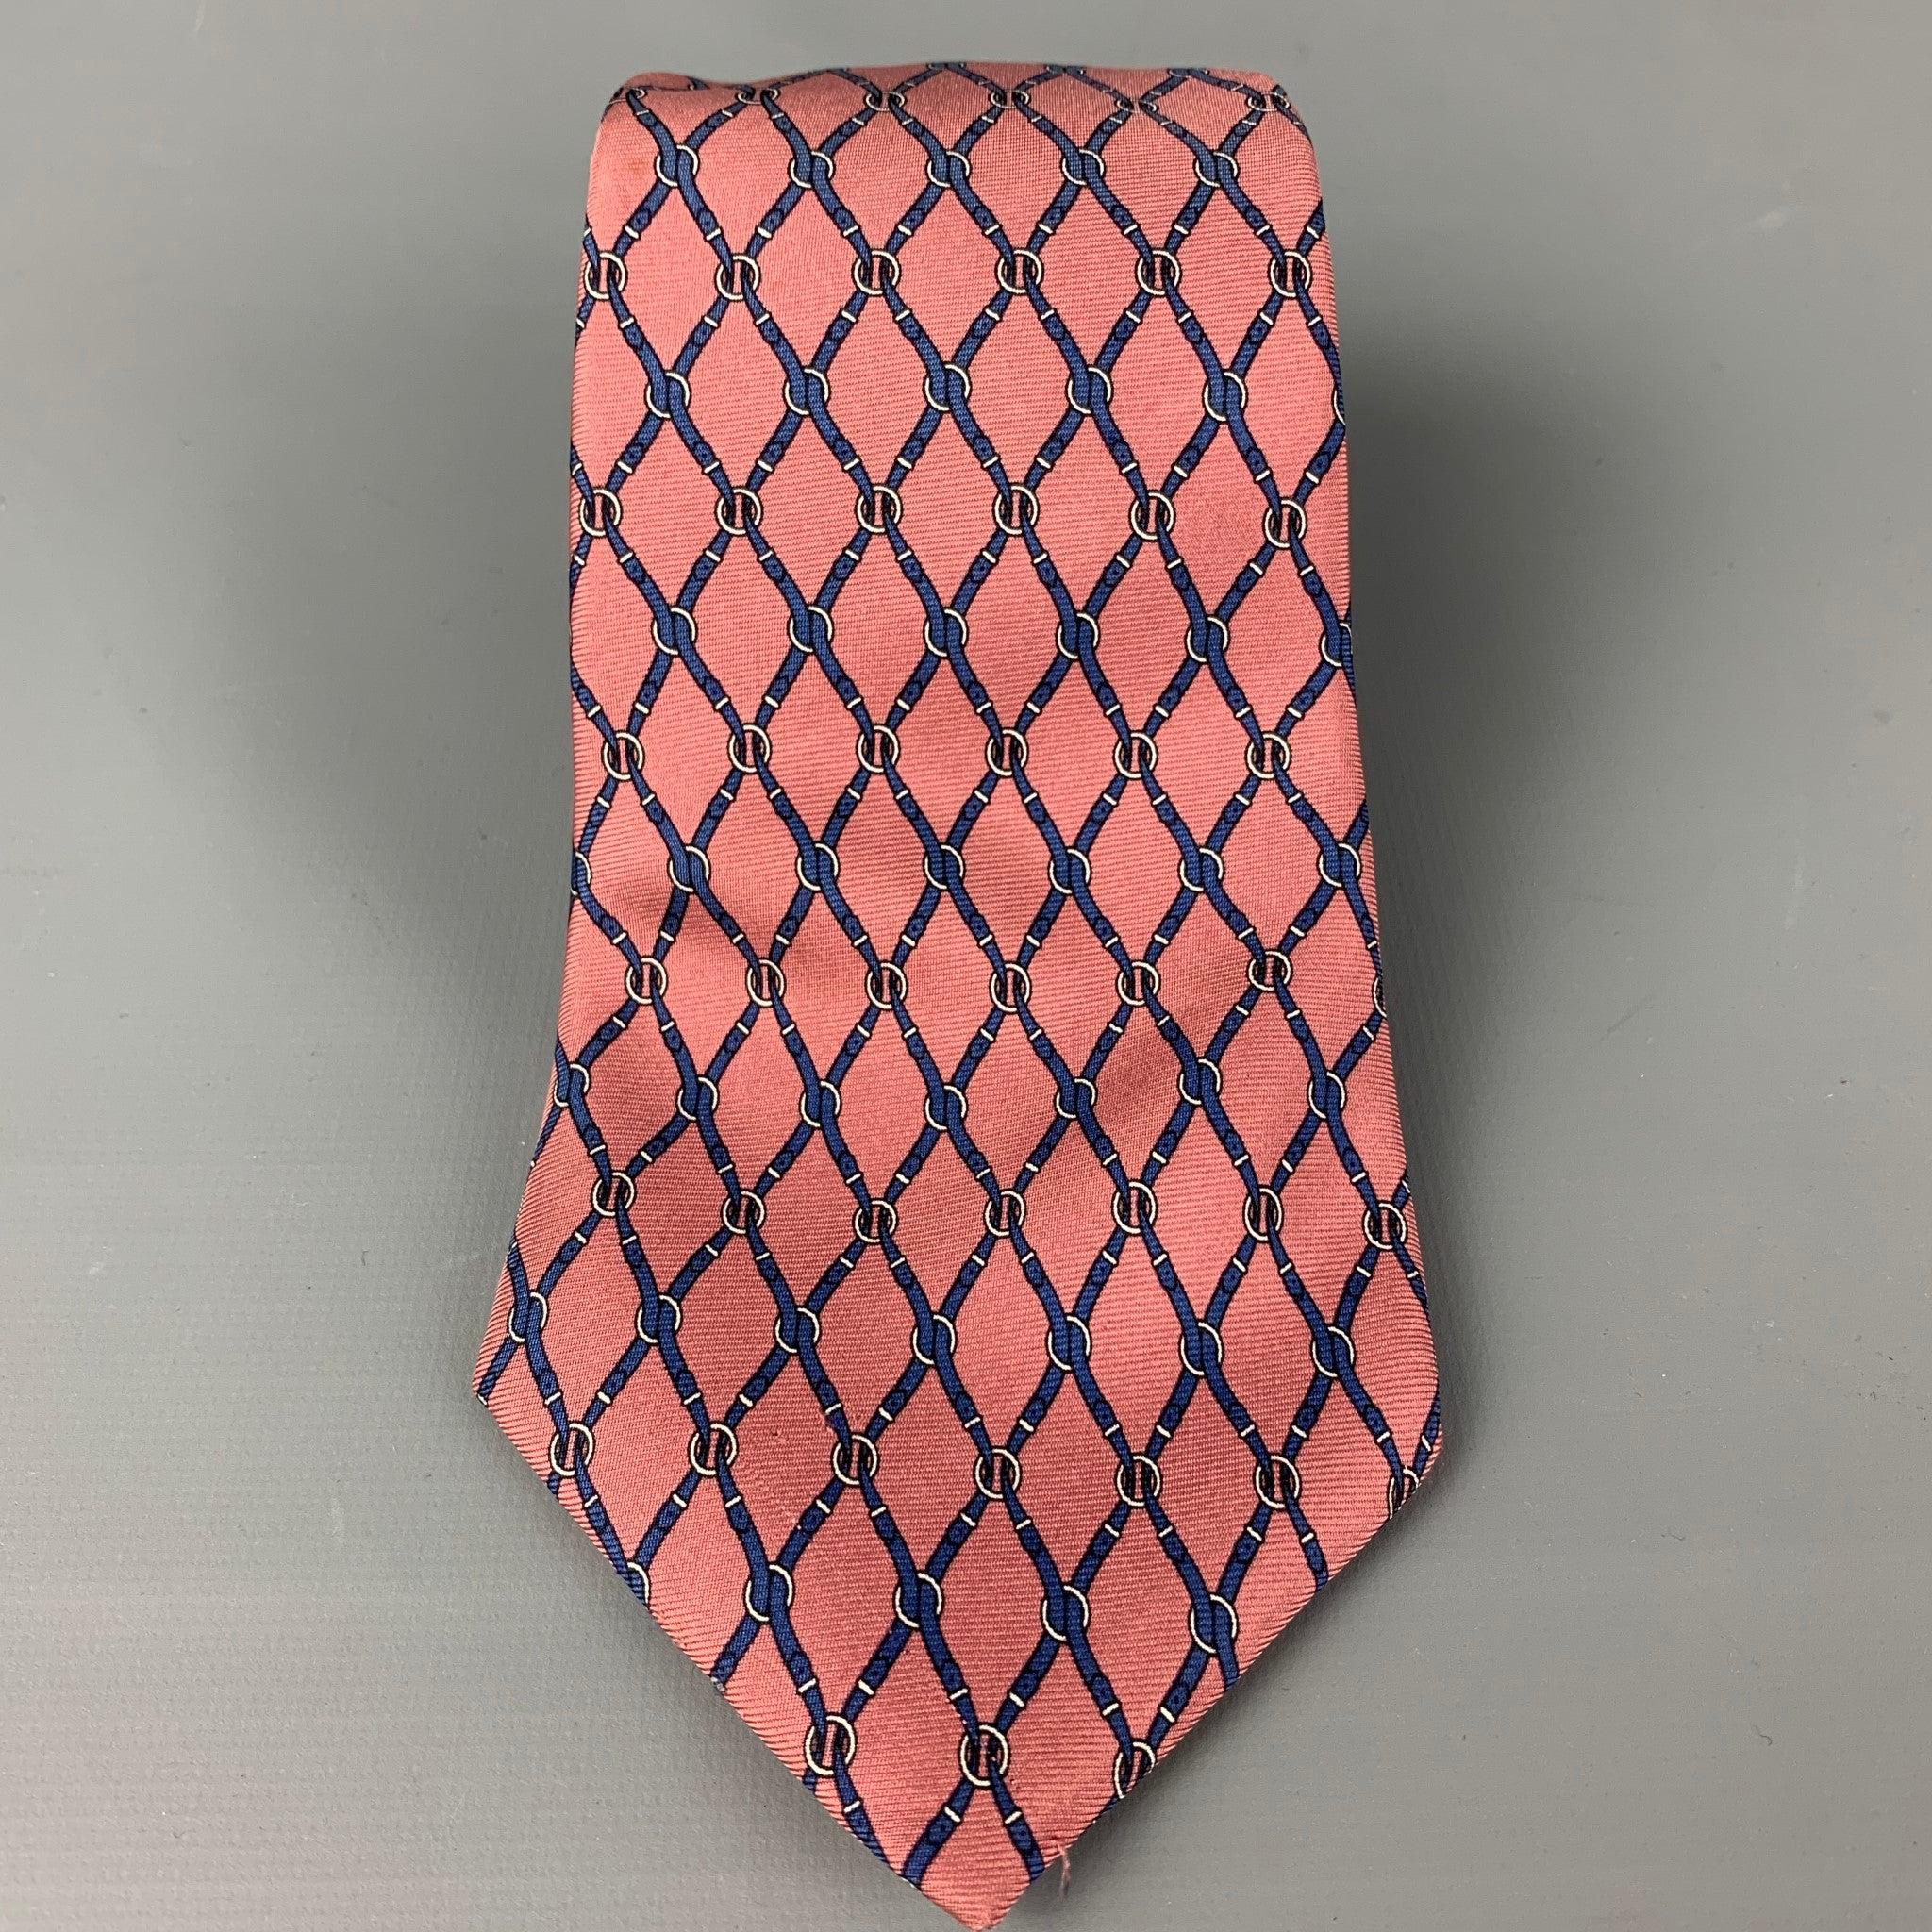 YVES SAINT LAURENT
 necktie comes in a pink &
 navy silk with a all over equestrian print. Made in USA. Very Good Pre-Owned Condition.Width: 3.75 inches 
  
  
  
 Sui Generis Reference: 118095
 Category: Tie
 More Details
  
 Brand: YVES SAINT